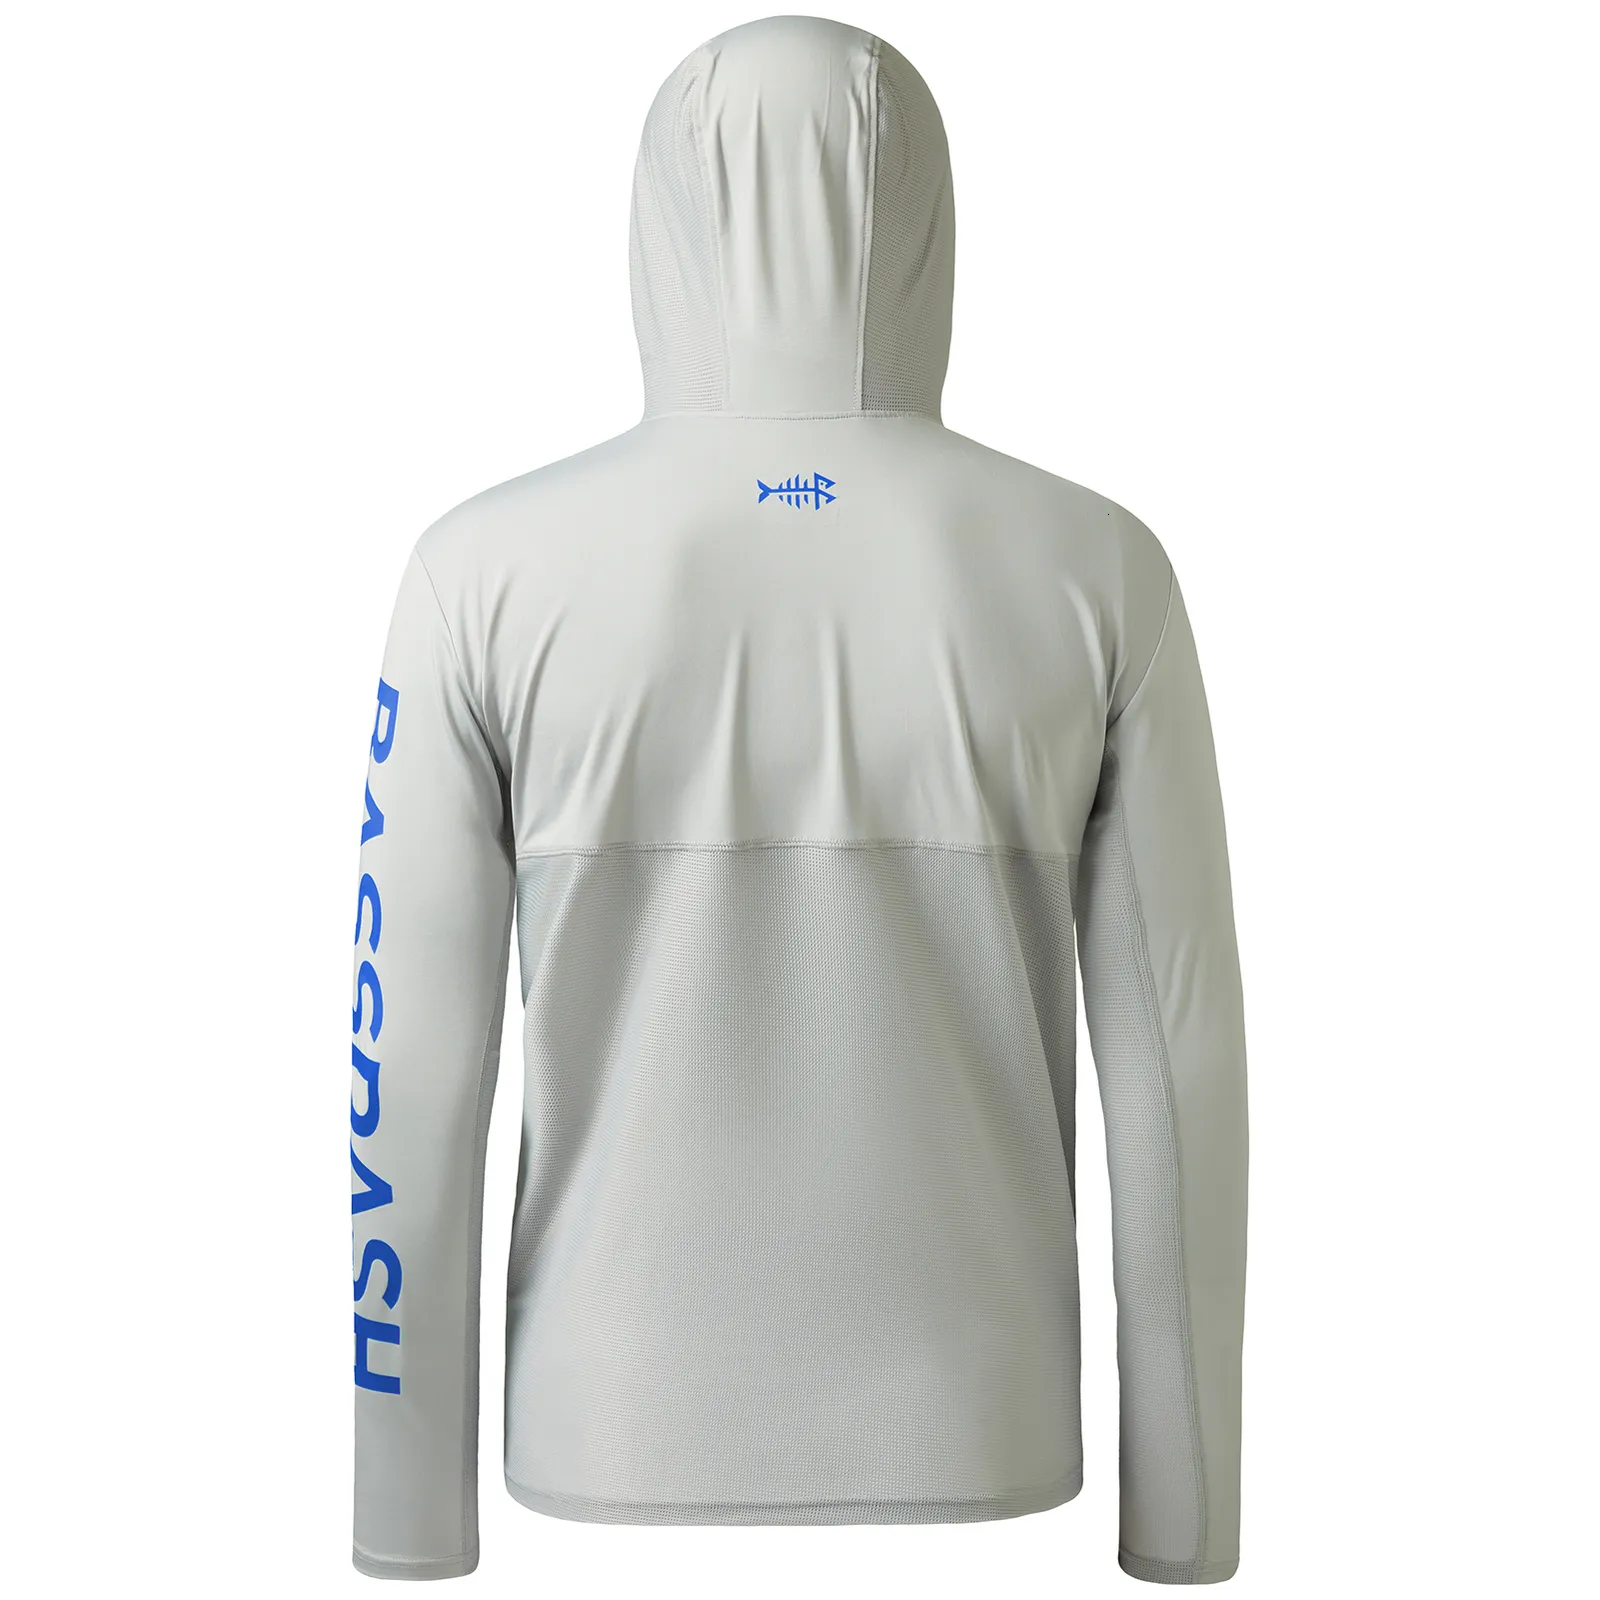 Other Sporting Goods Bassdash UPF 50 Hooded Fishing Shirts Long Sleeve  Winter Male Hoodies Muticolor Ourdoor Outfit BG1003 230816 From Kang07,  $24.23